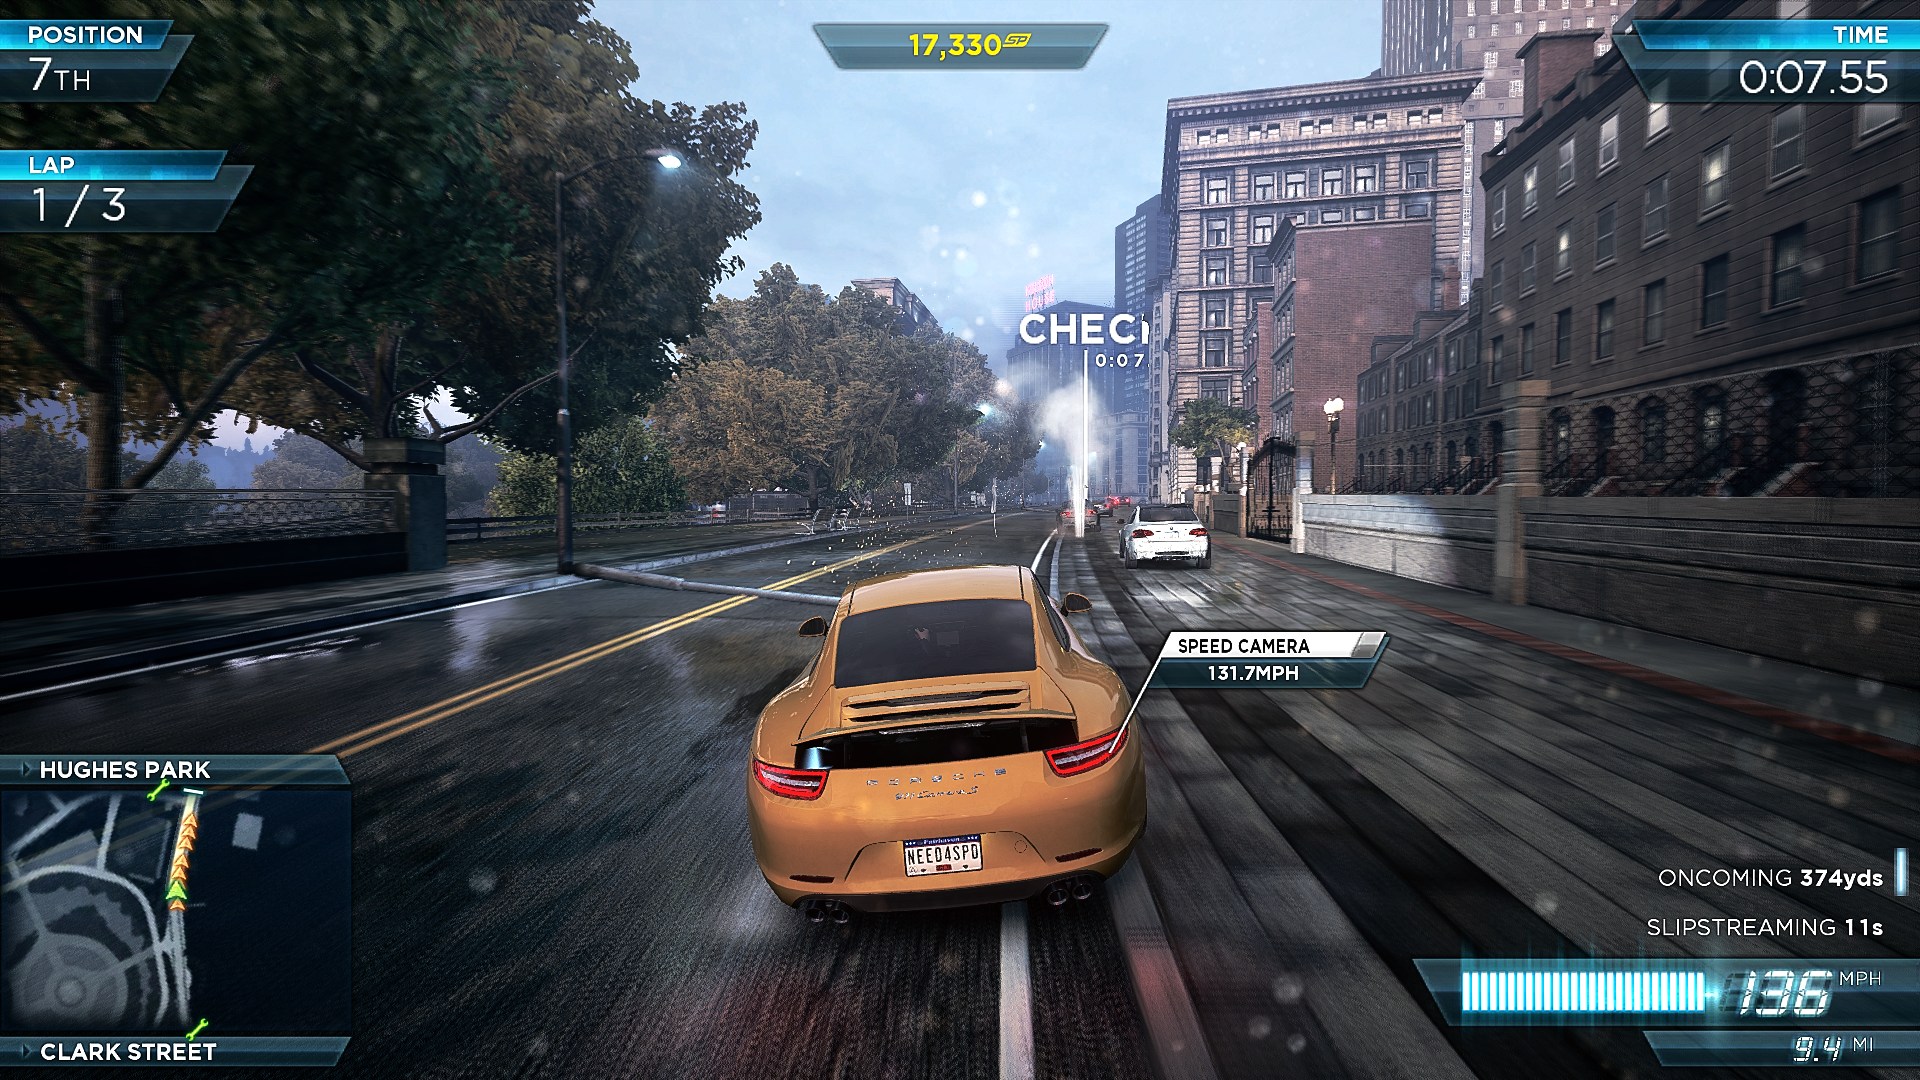 Need For Speed: Most Wanted - PC Performance Analysis